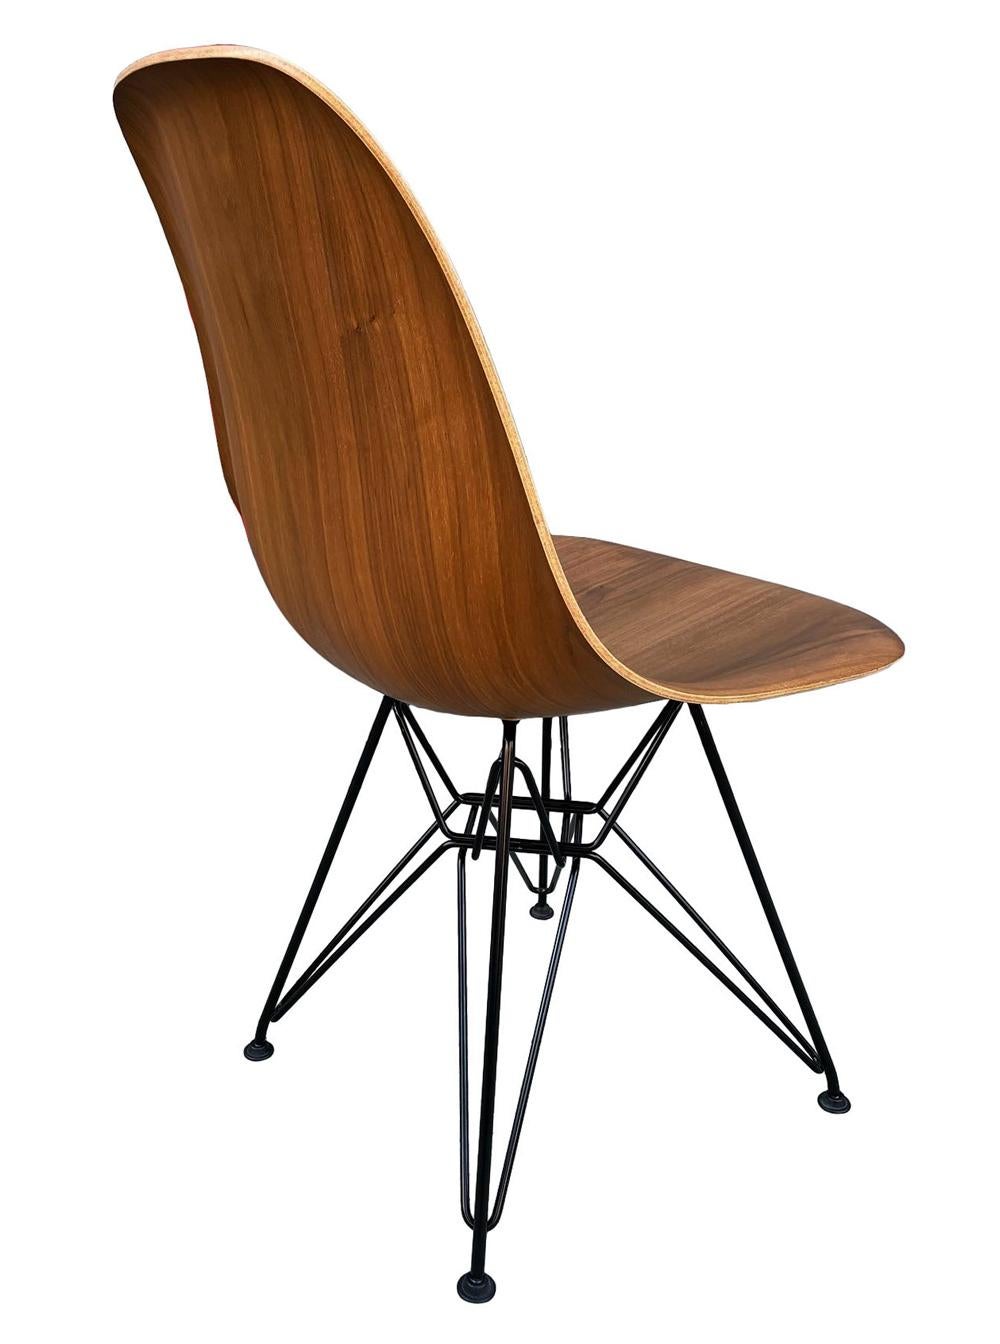 Set of 8 Mid-Century Modern Walnut Wood Shell Dining Chairs by Charles Eames For Sale 4